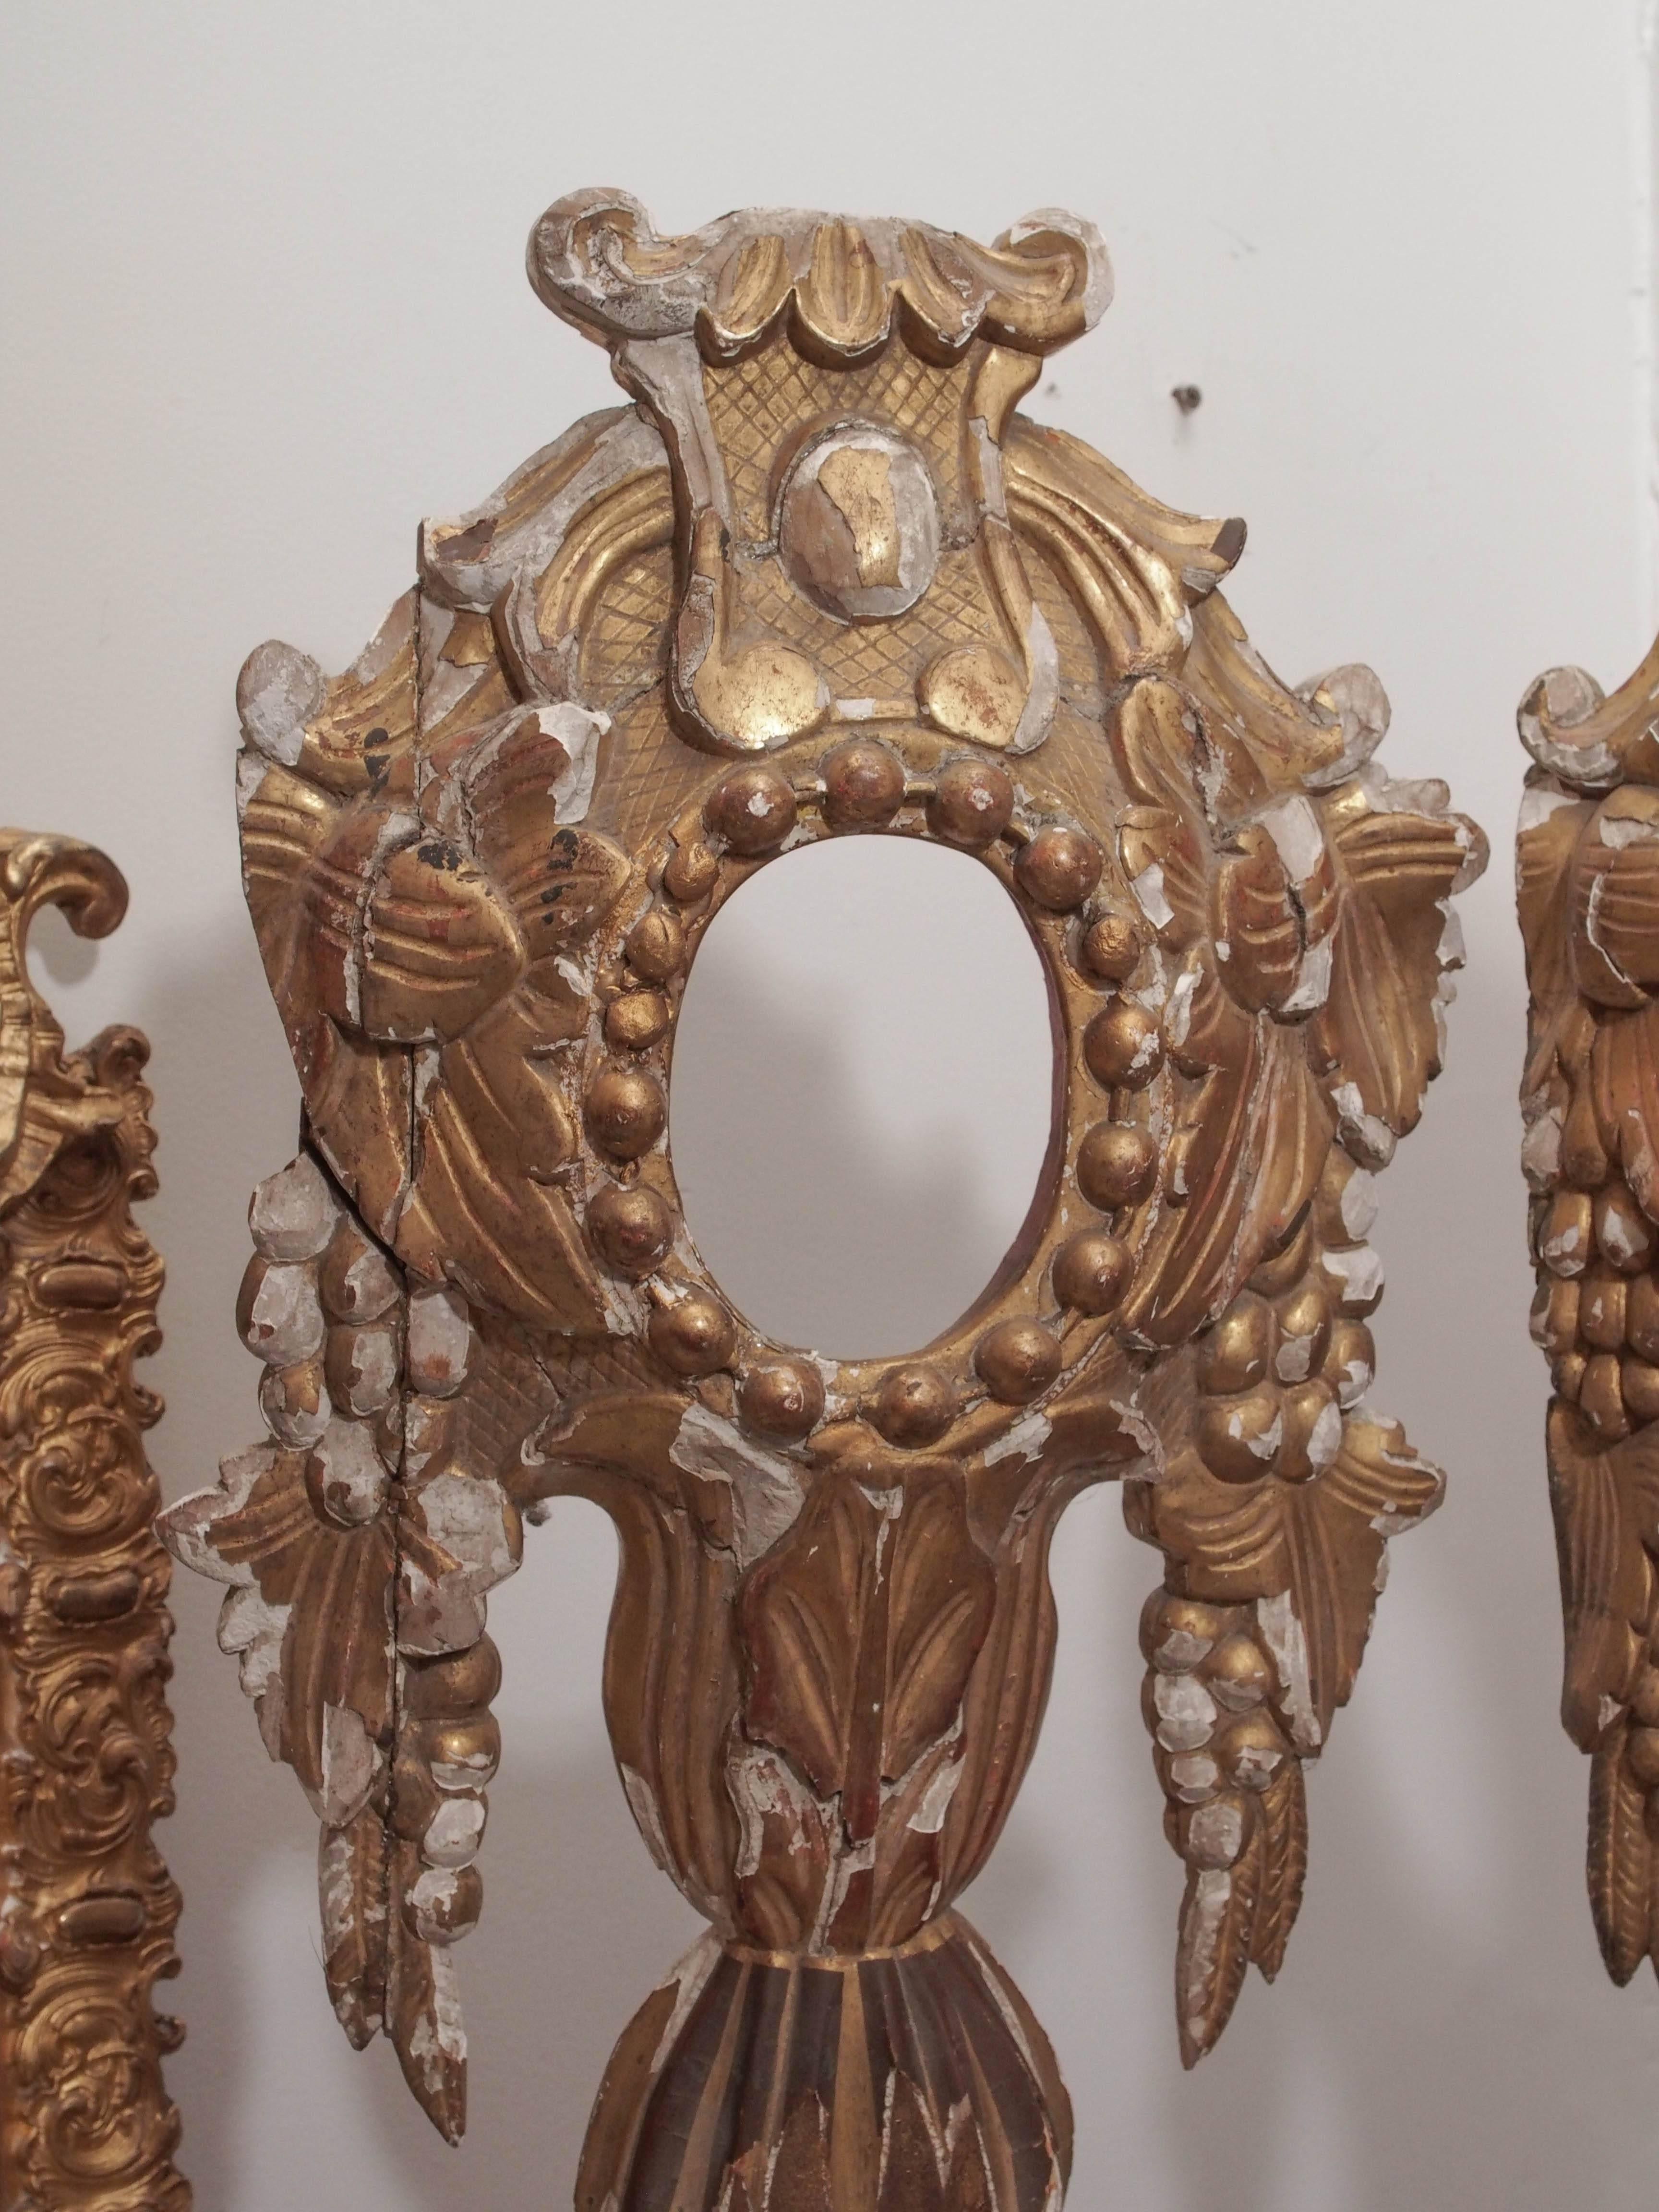 Pair of 18th century baroque Italian reliquaries. Can be wall mounted. 